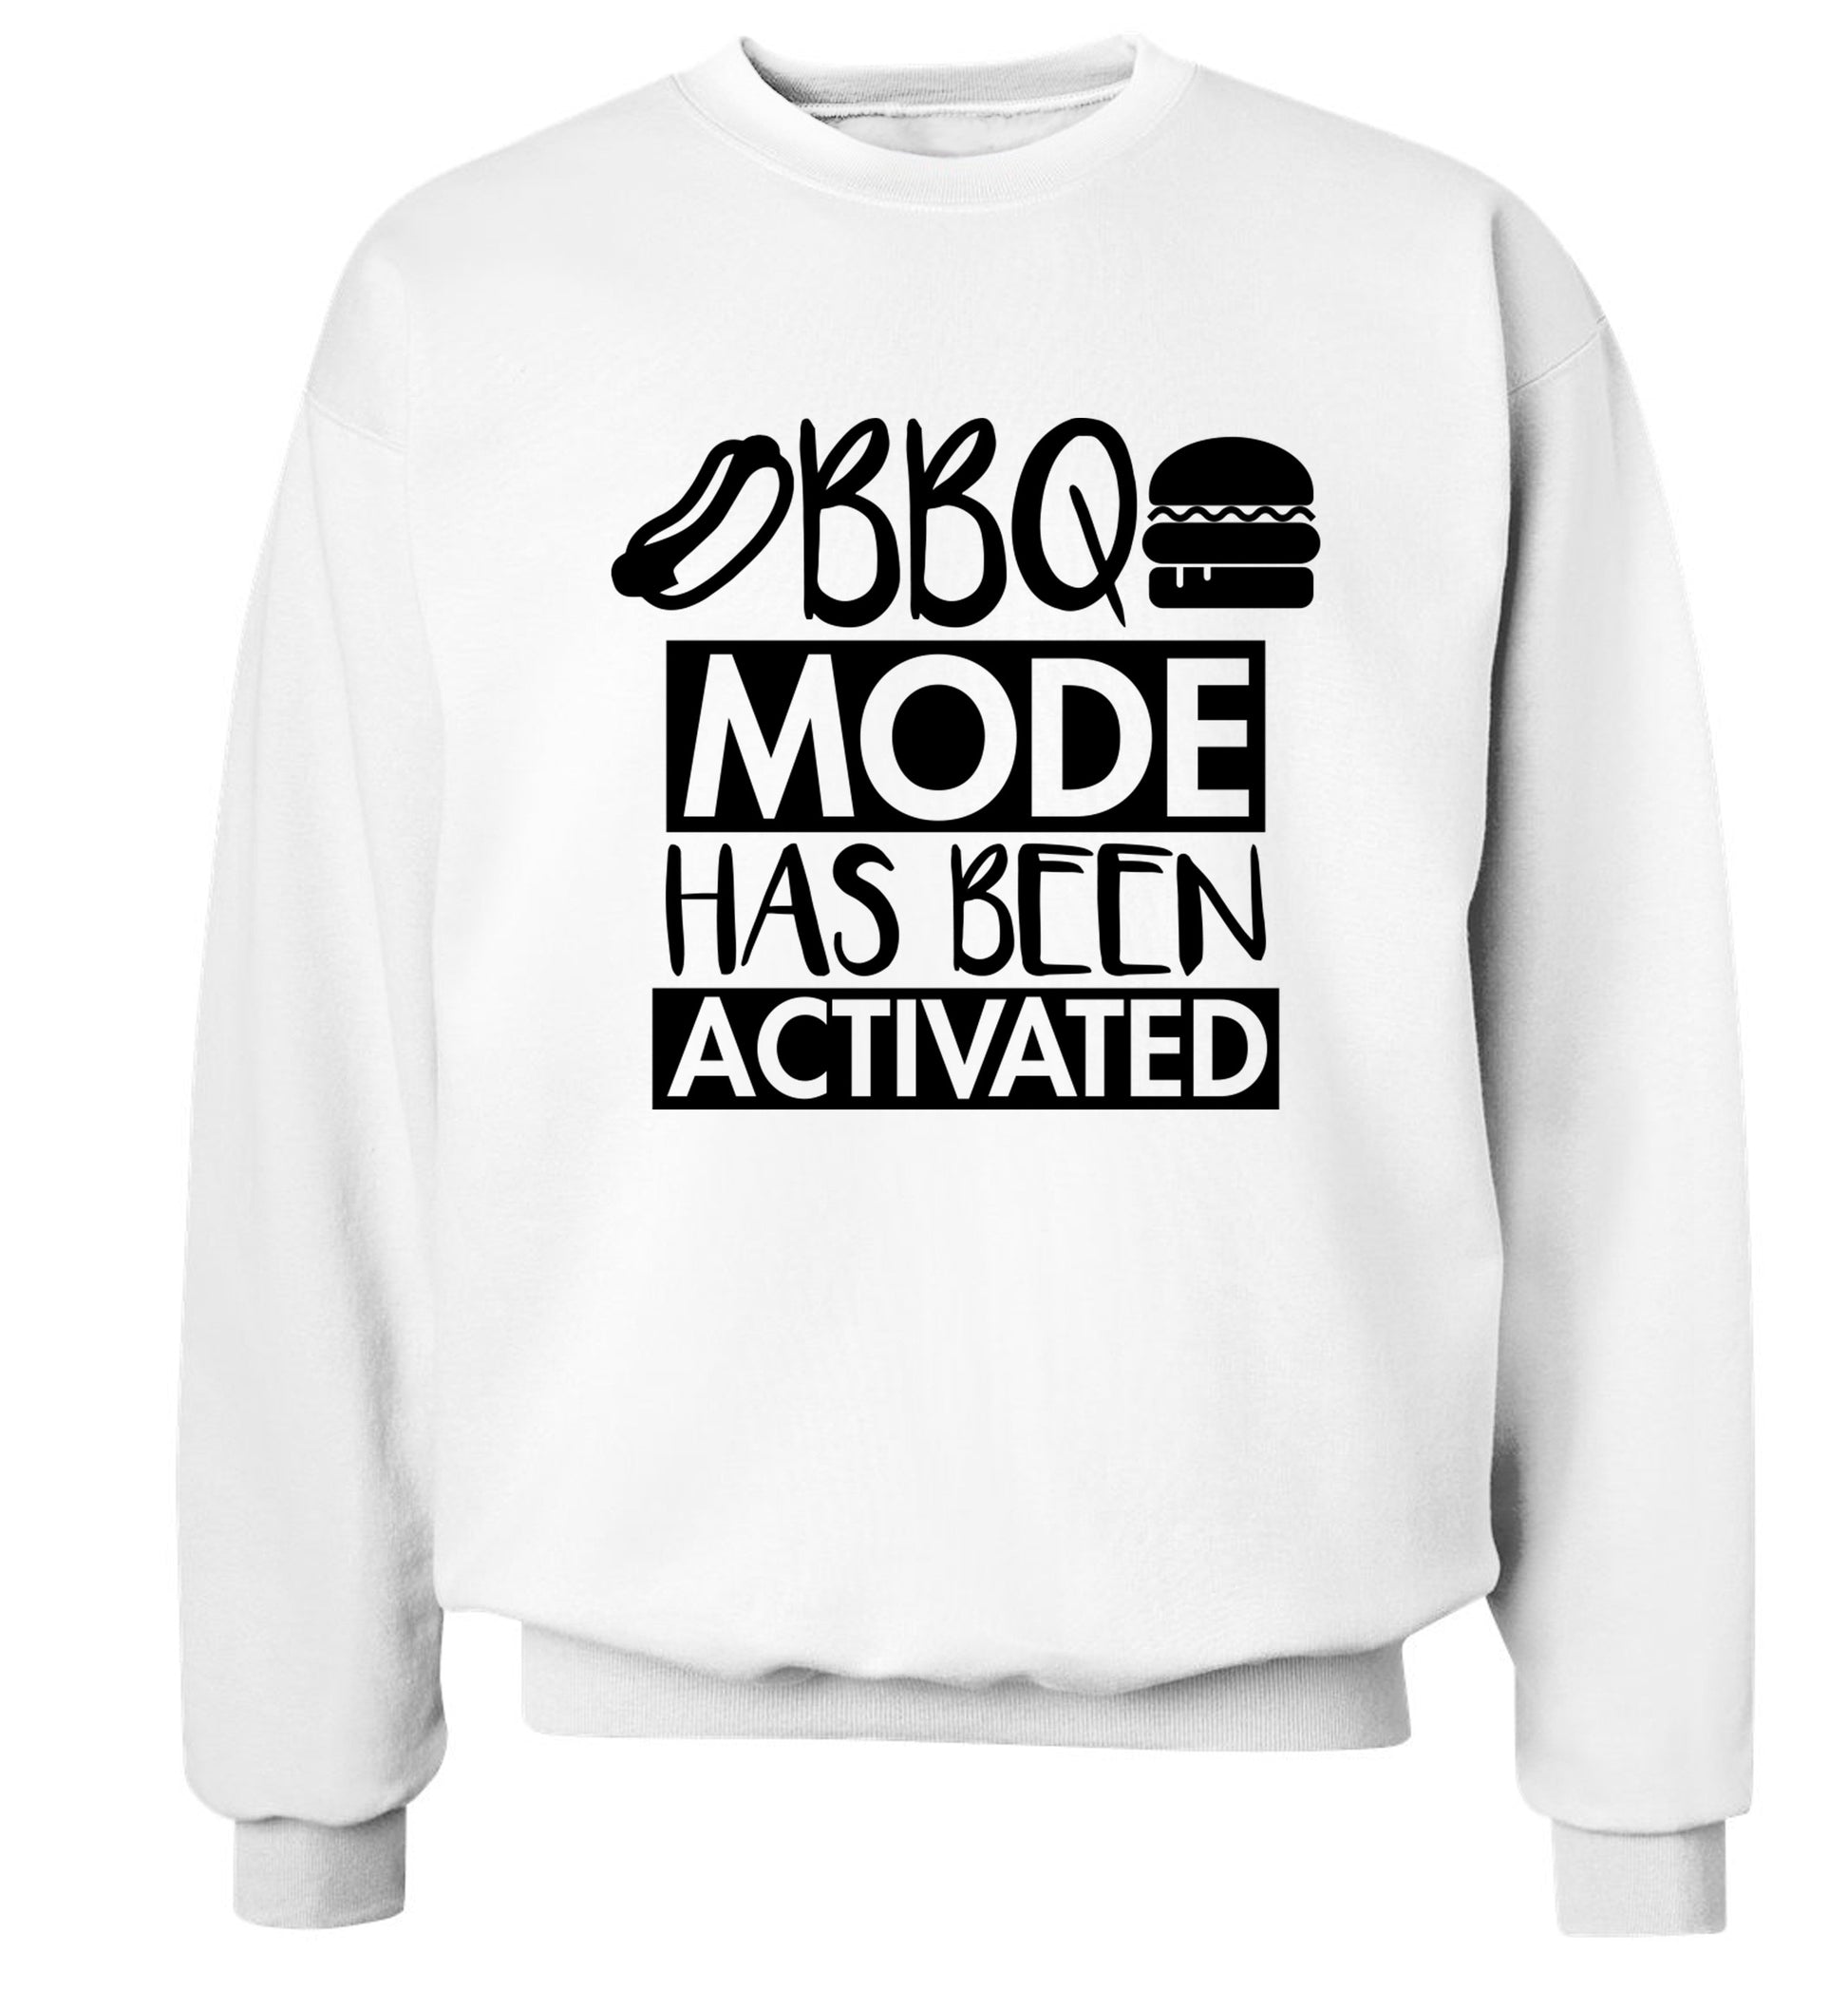 Bbq mode has been activated Adult's unisex white Sweater 2XL